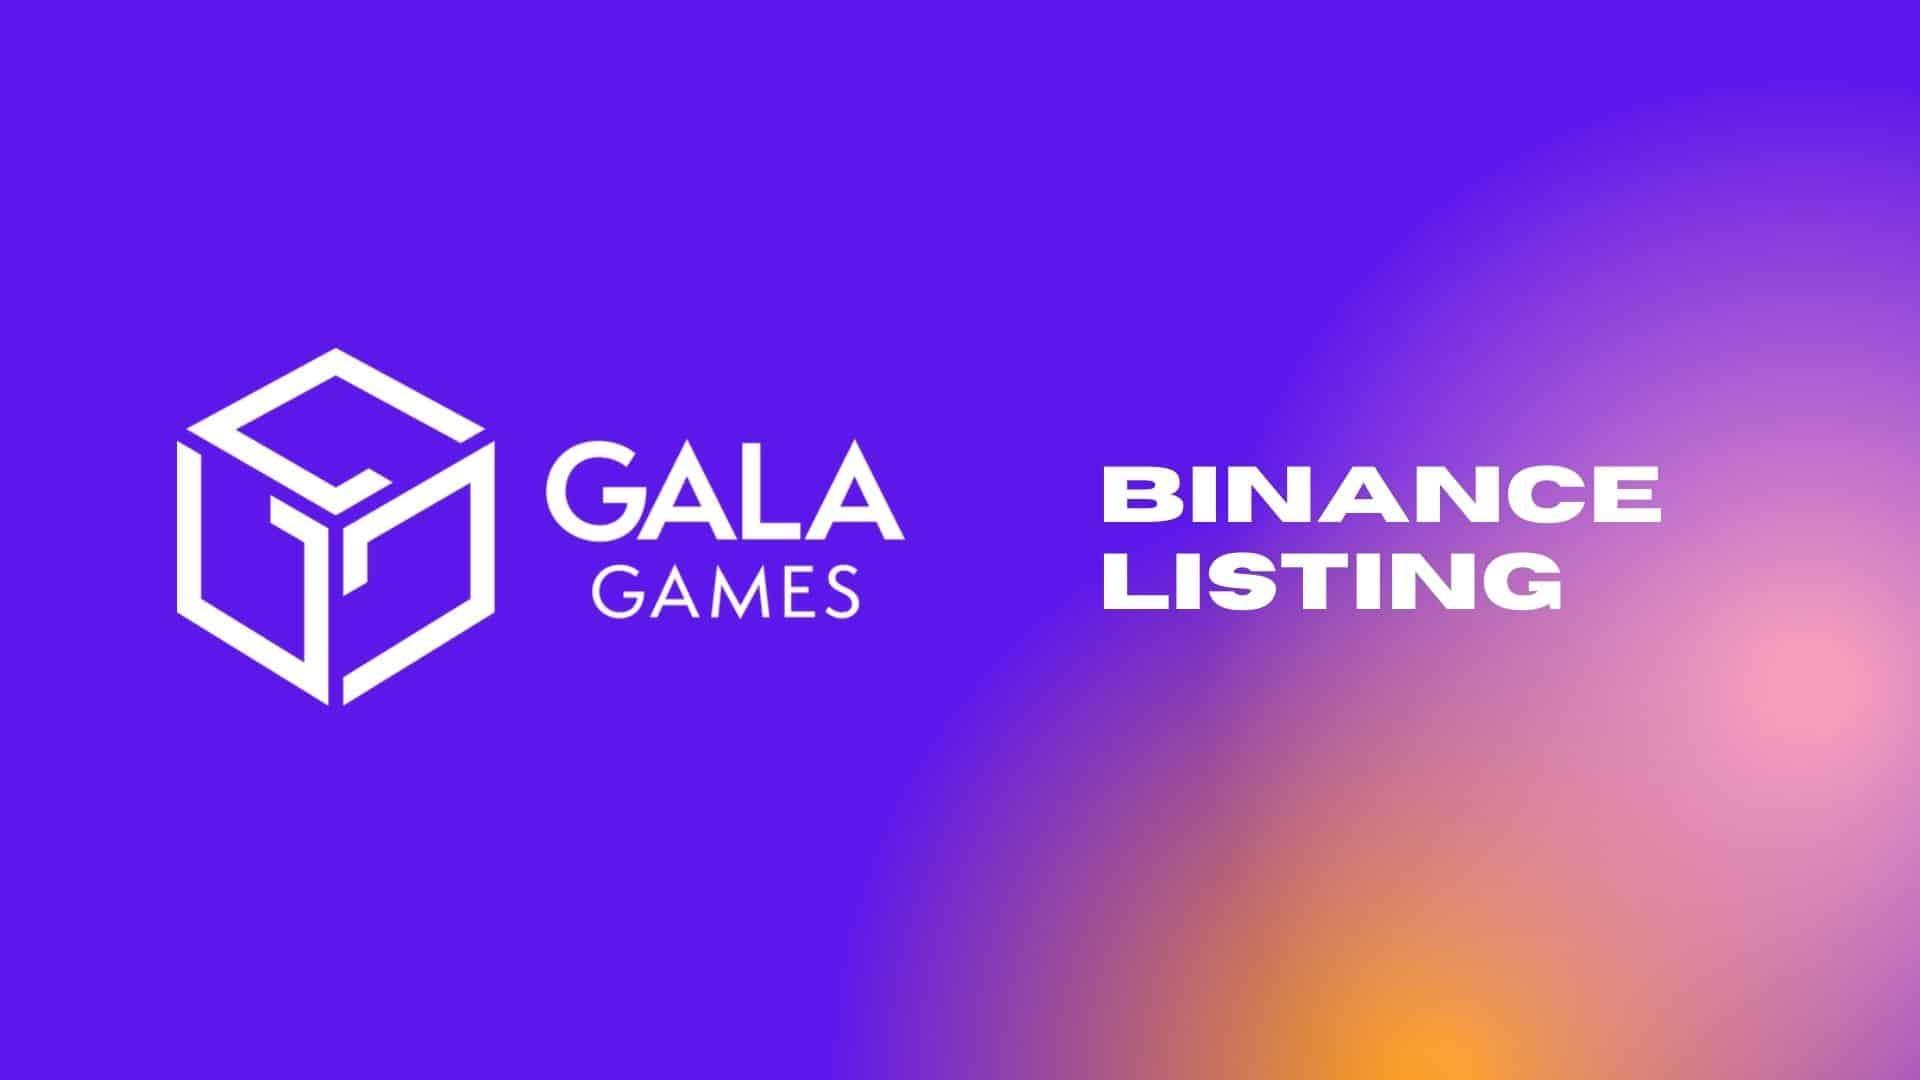 Binance Group Comes Forward in Gala Games' Contract Upgrade